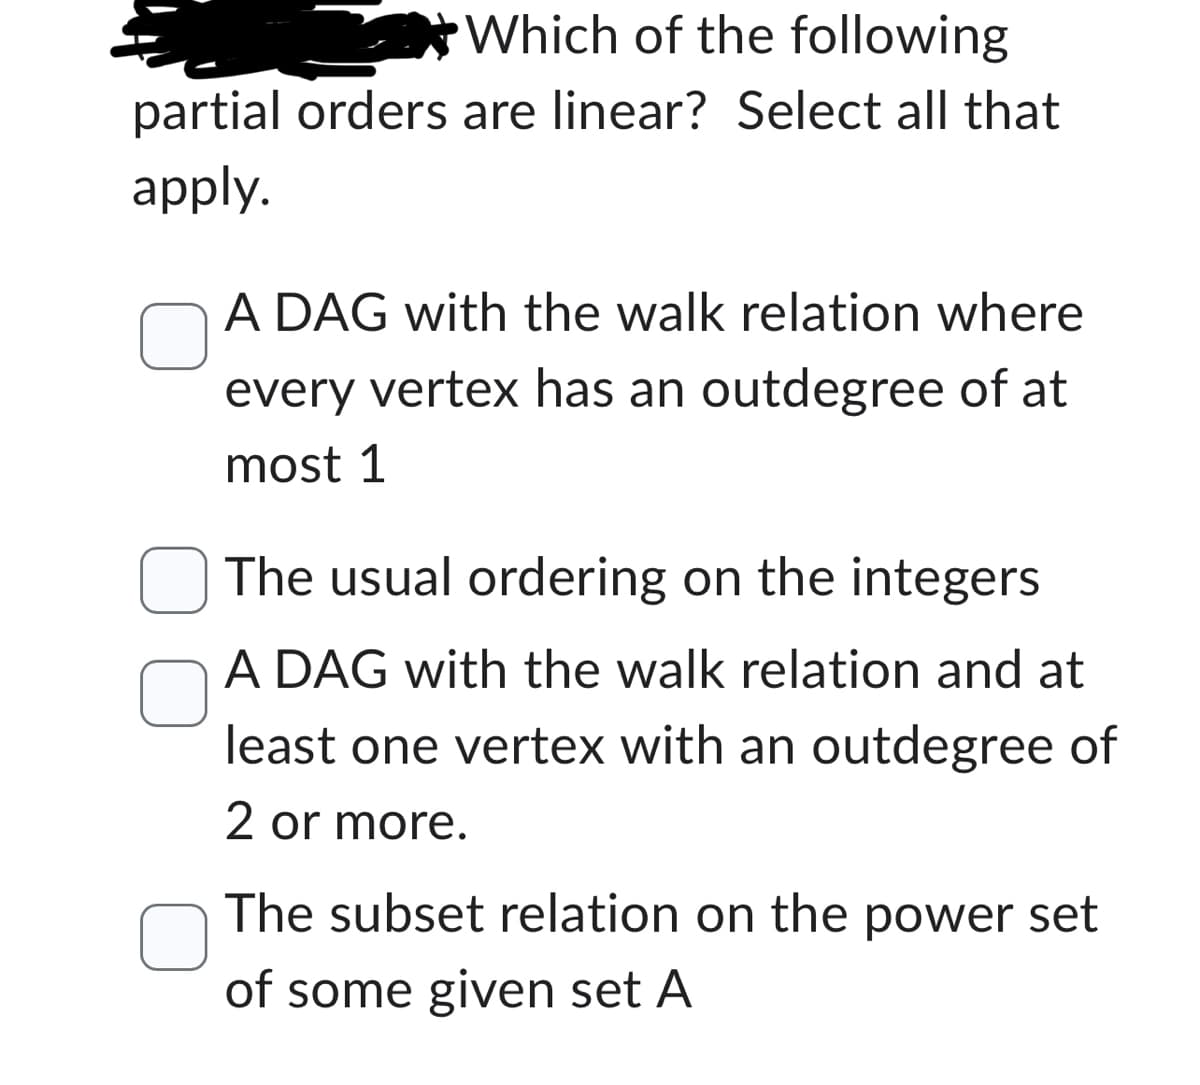 Which of the following
partial orders are linear? Select all that
apply.
A DAG with the walk relation where
every vertex has an outdegree of at
most 1
The usual ordering on the integers
A DAG with the walk relation and at
least one vertex with an outdegree of
2 or more.
The subset relation on the power set
of some given set A